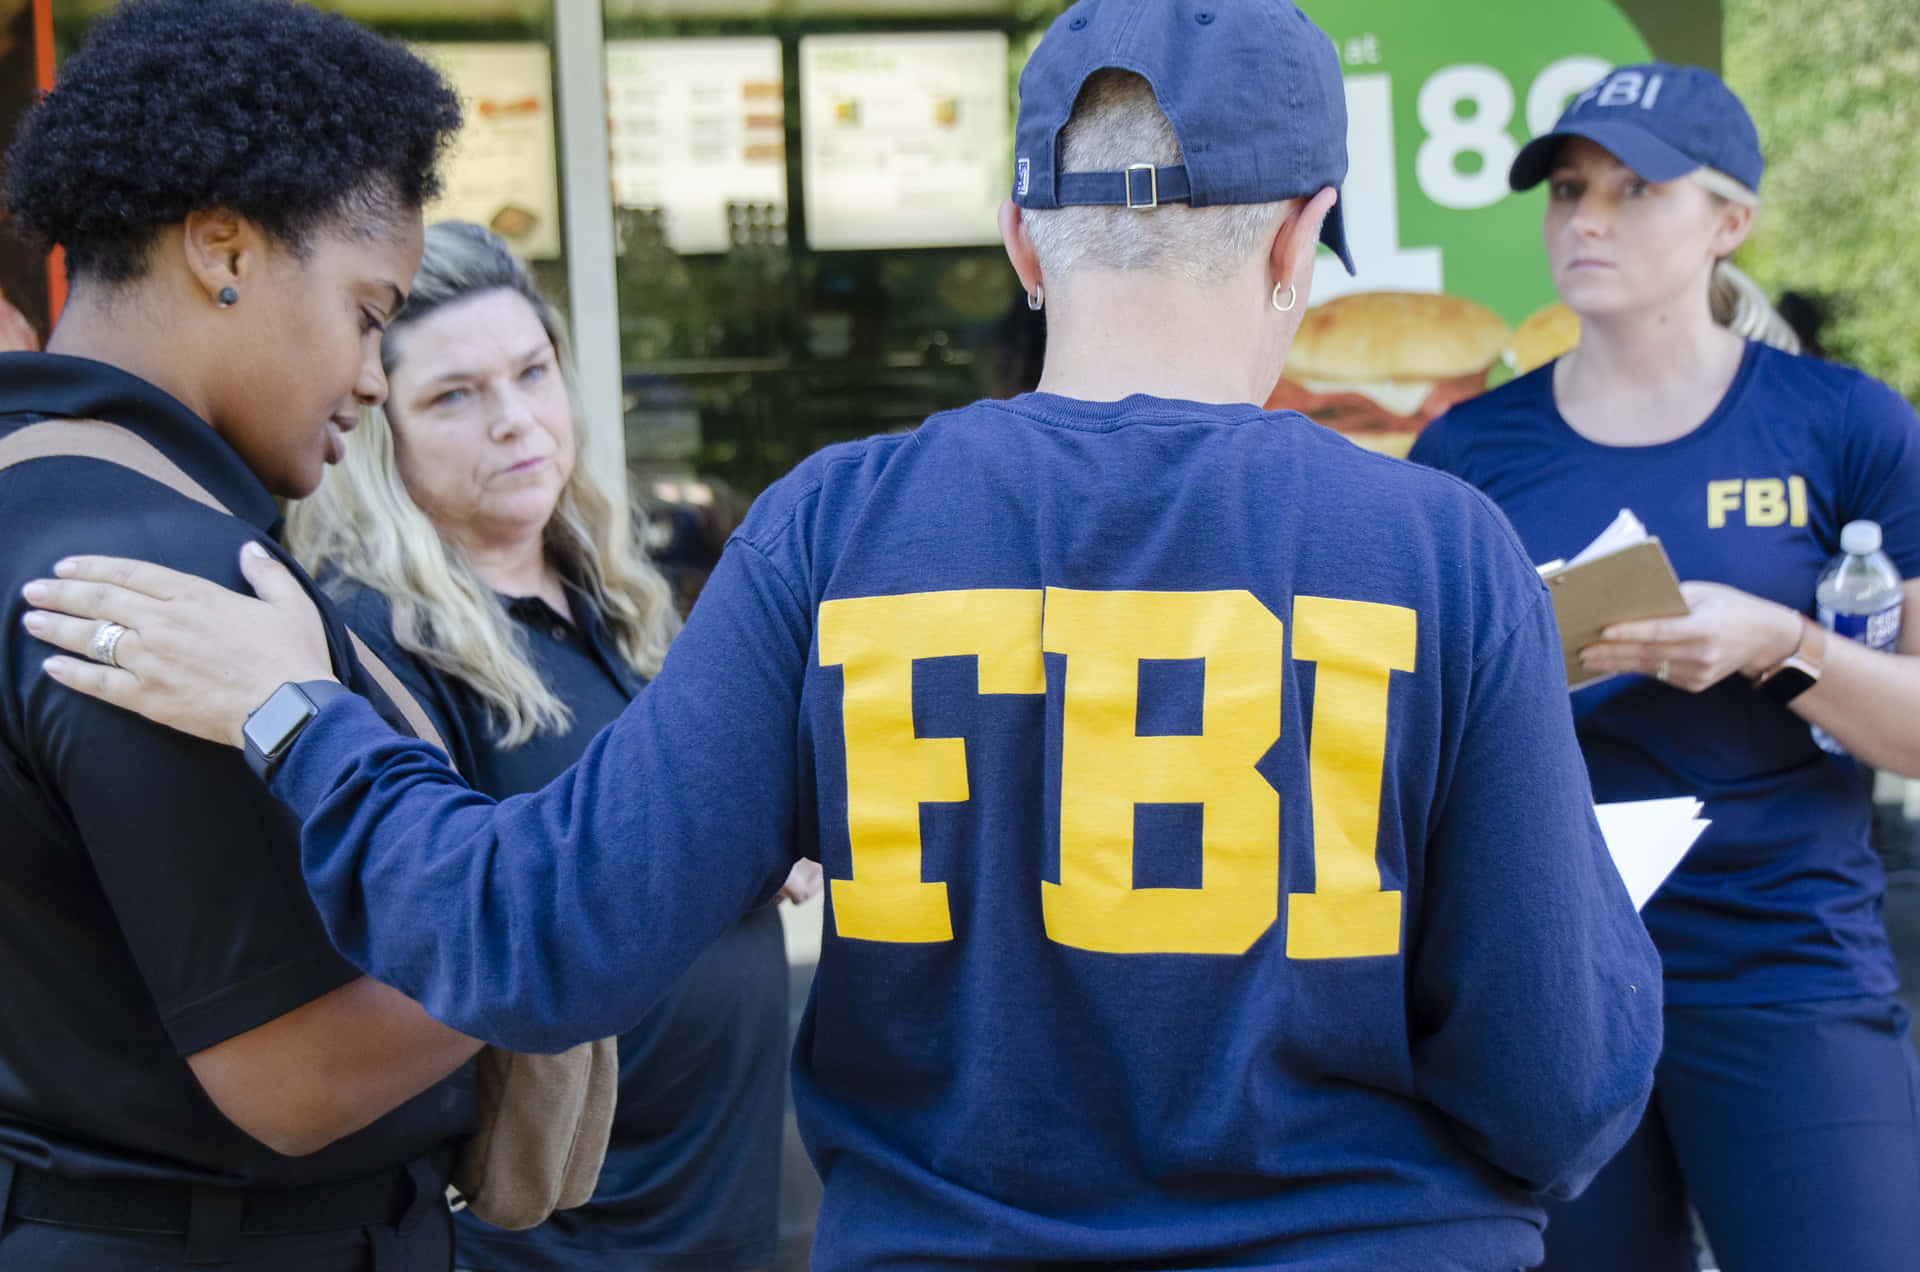 Fbi Agents In Uniform Standing Outside A Restaurant Background